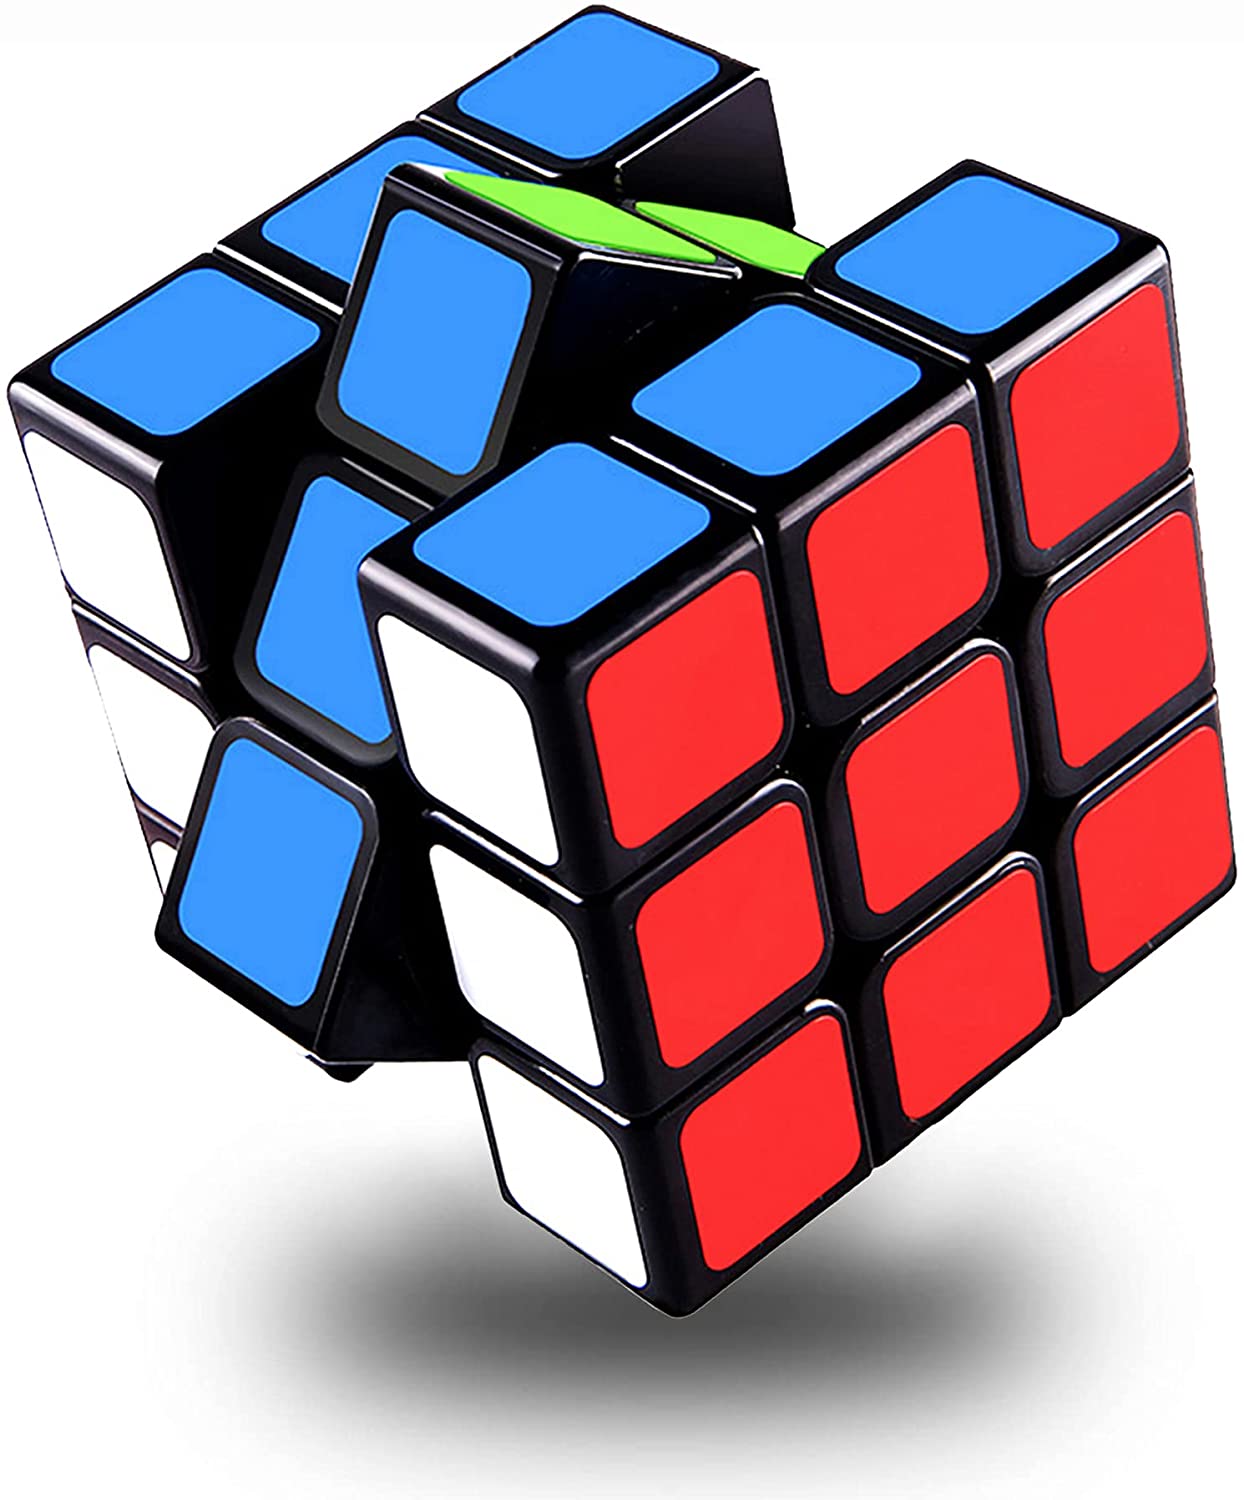 Original Magic Rubiks Cube Durable Smooth Game Classic Puzzles 3x3x3 Speed Cube 